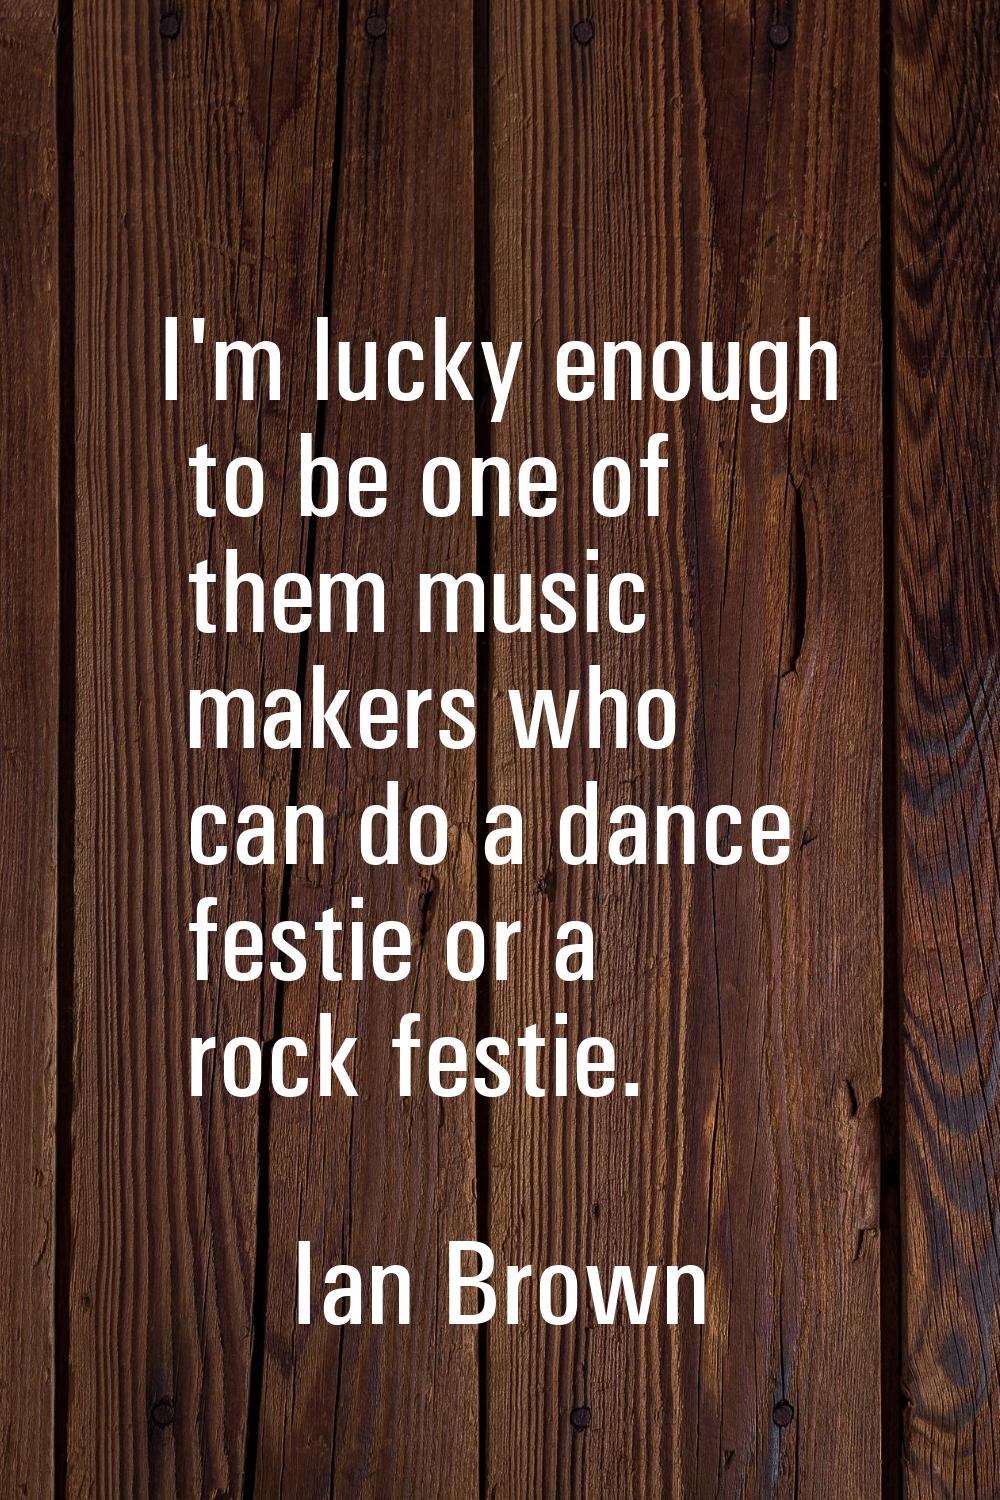 I'm lucky enough to be one of them music makers who can do a dance festie or a rock festie.